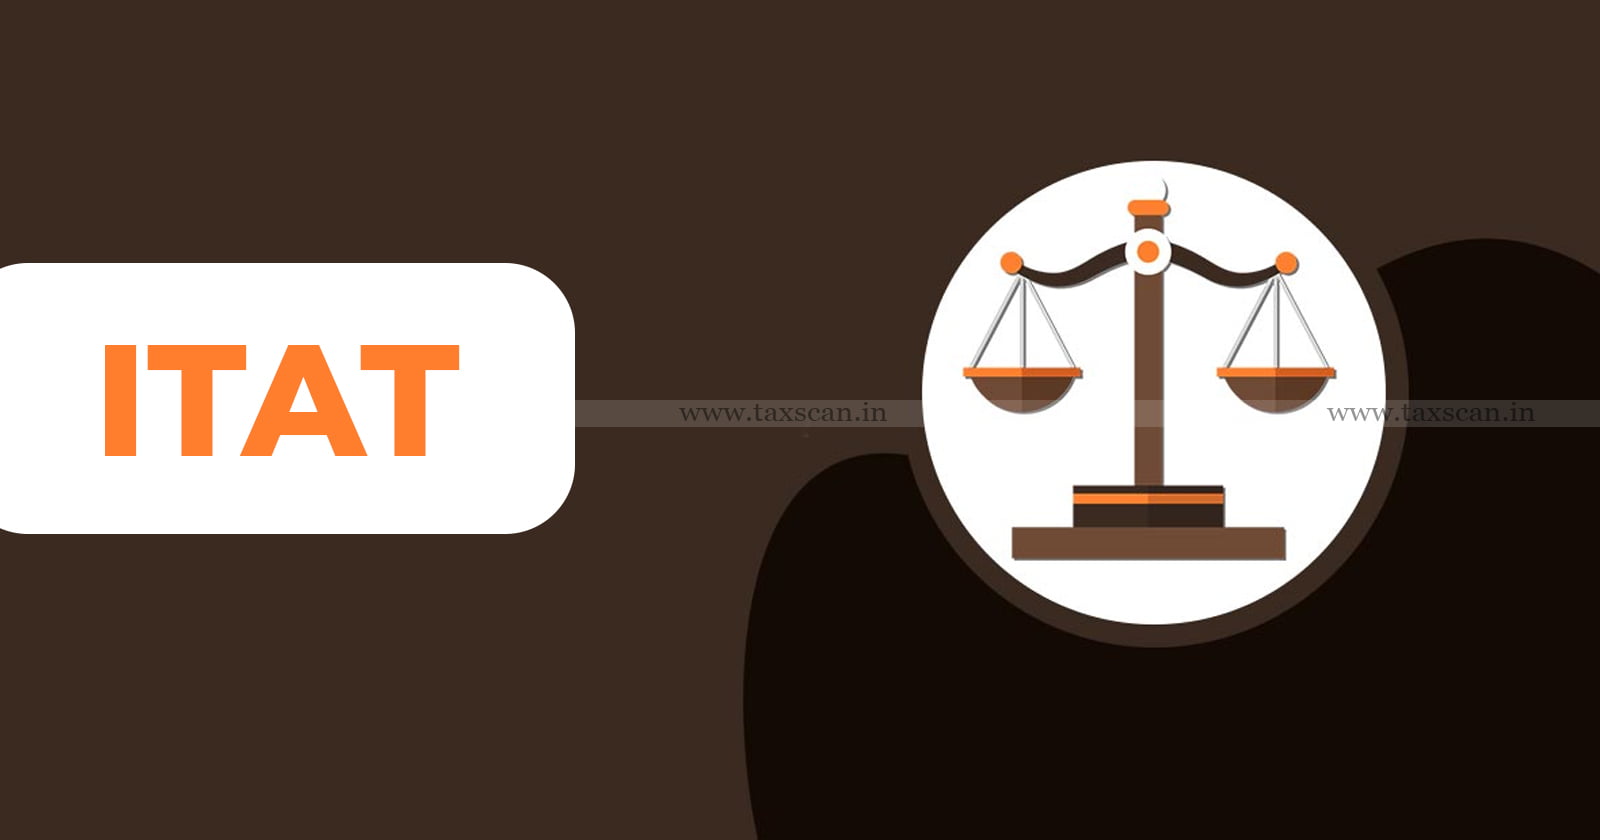 ITAT - Income Tax Appellate Tribunal - section 153A of the Income Tax Act - mandatory approval - taxscan